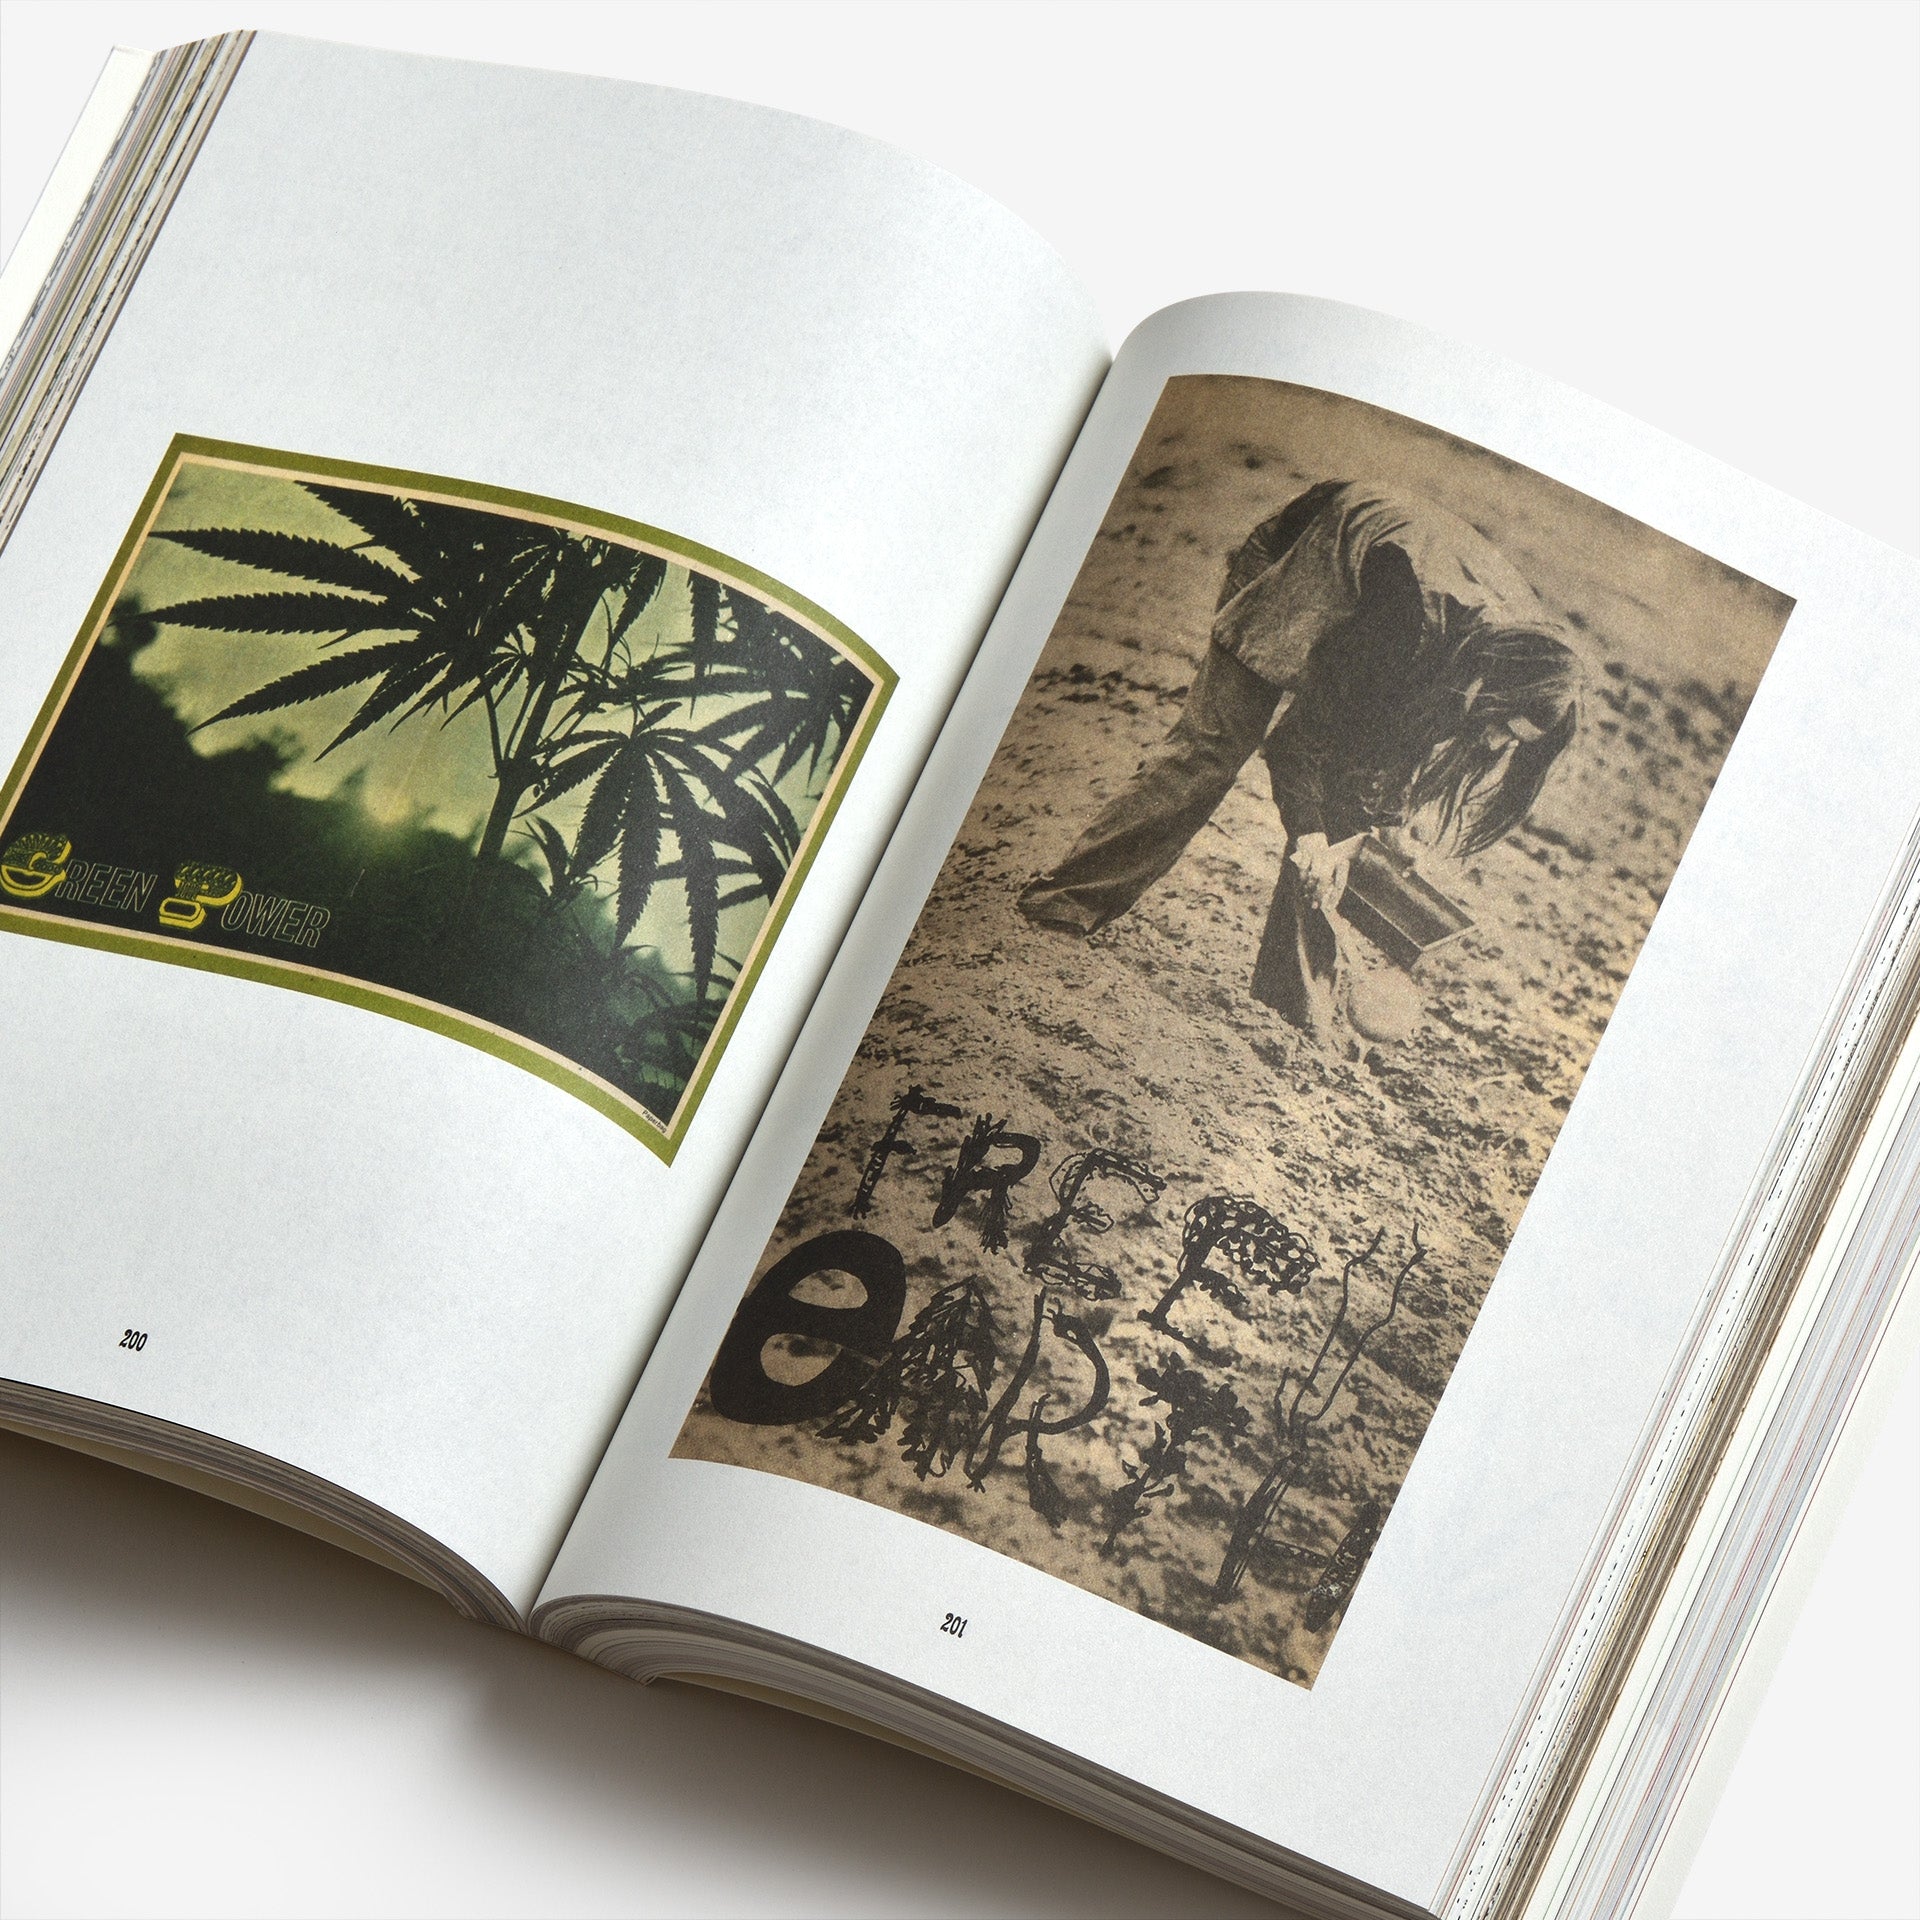 David Jacob Kramer: Heads Together. Weed and the Underground Press Syndicate 1965–1973